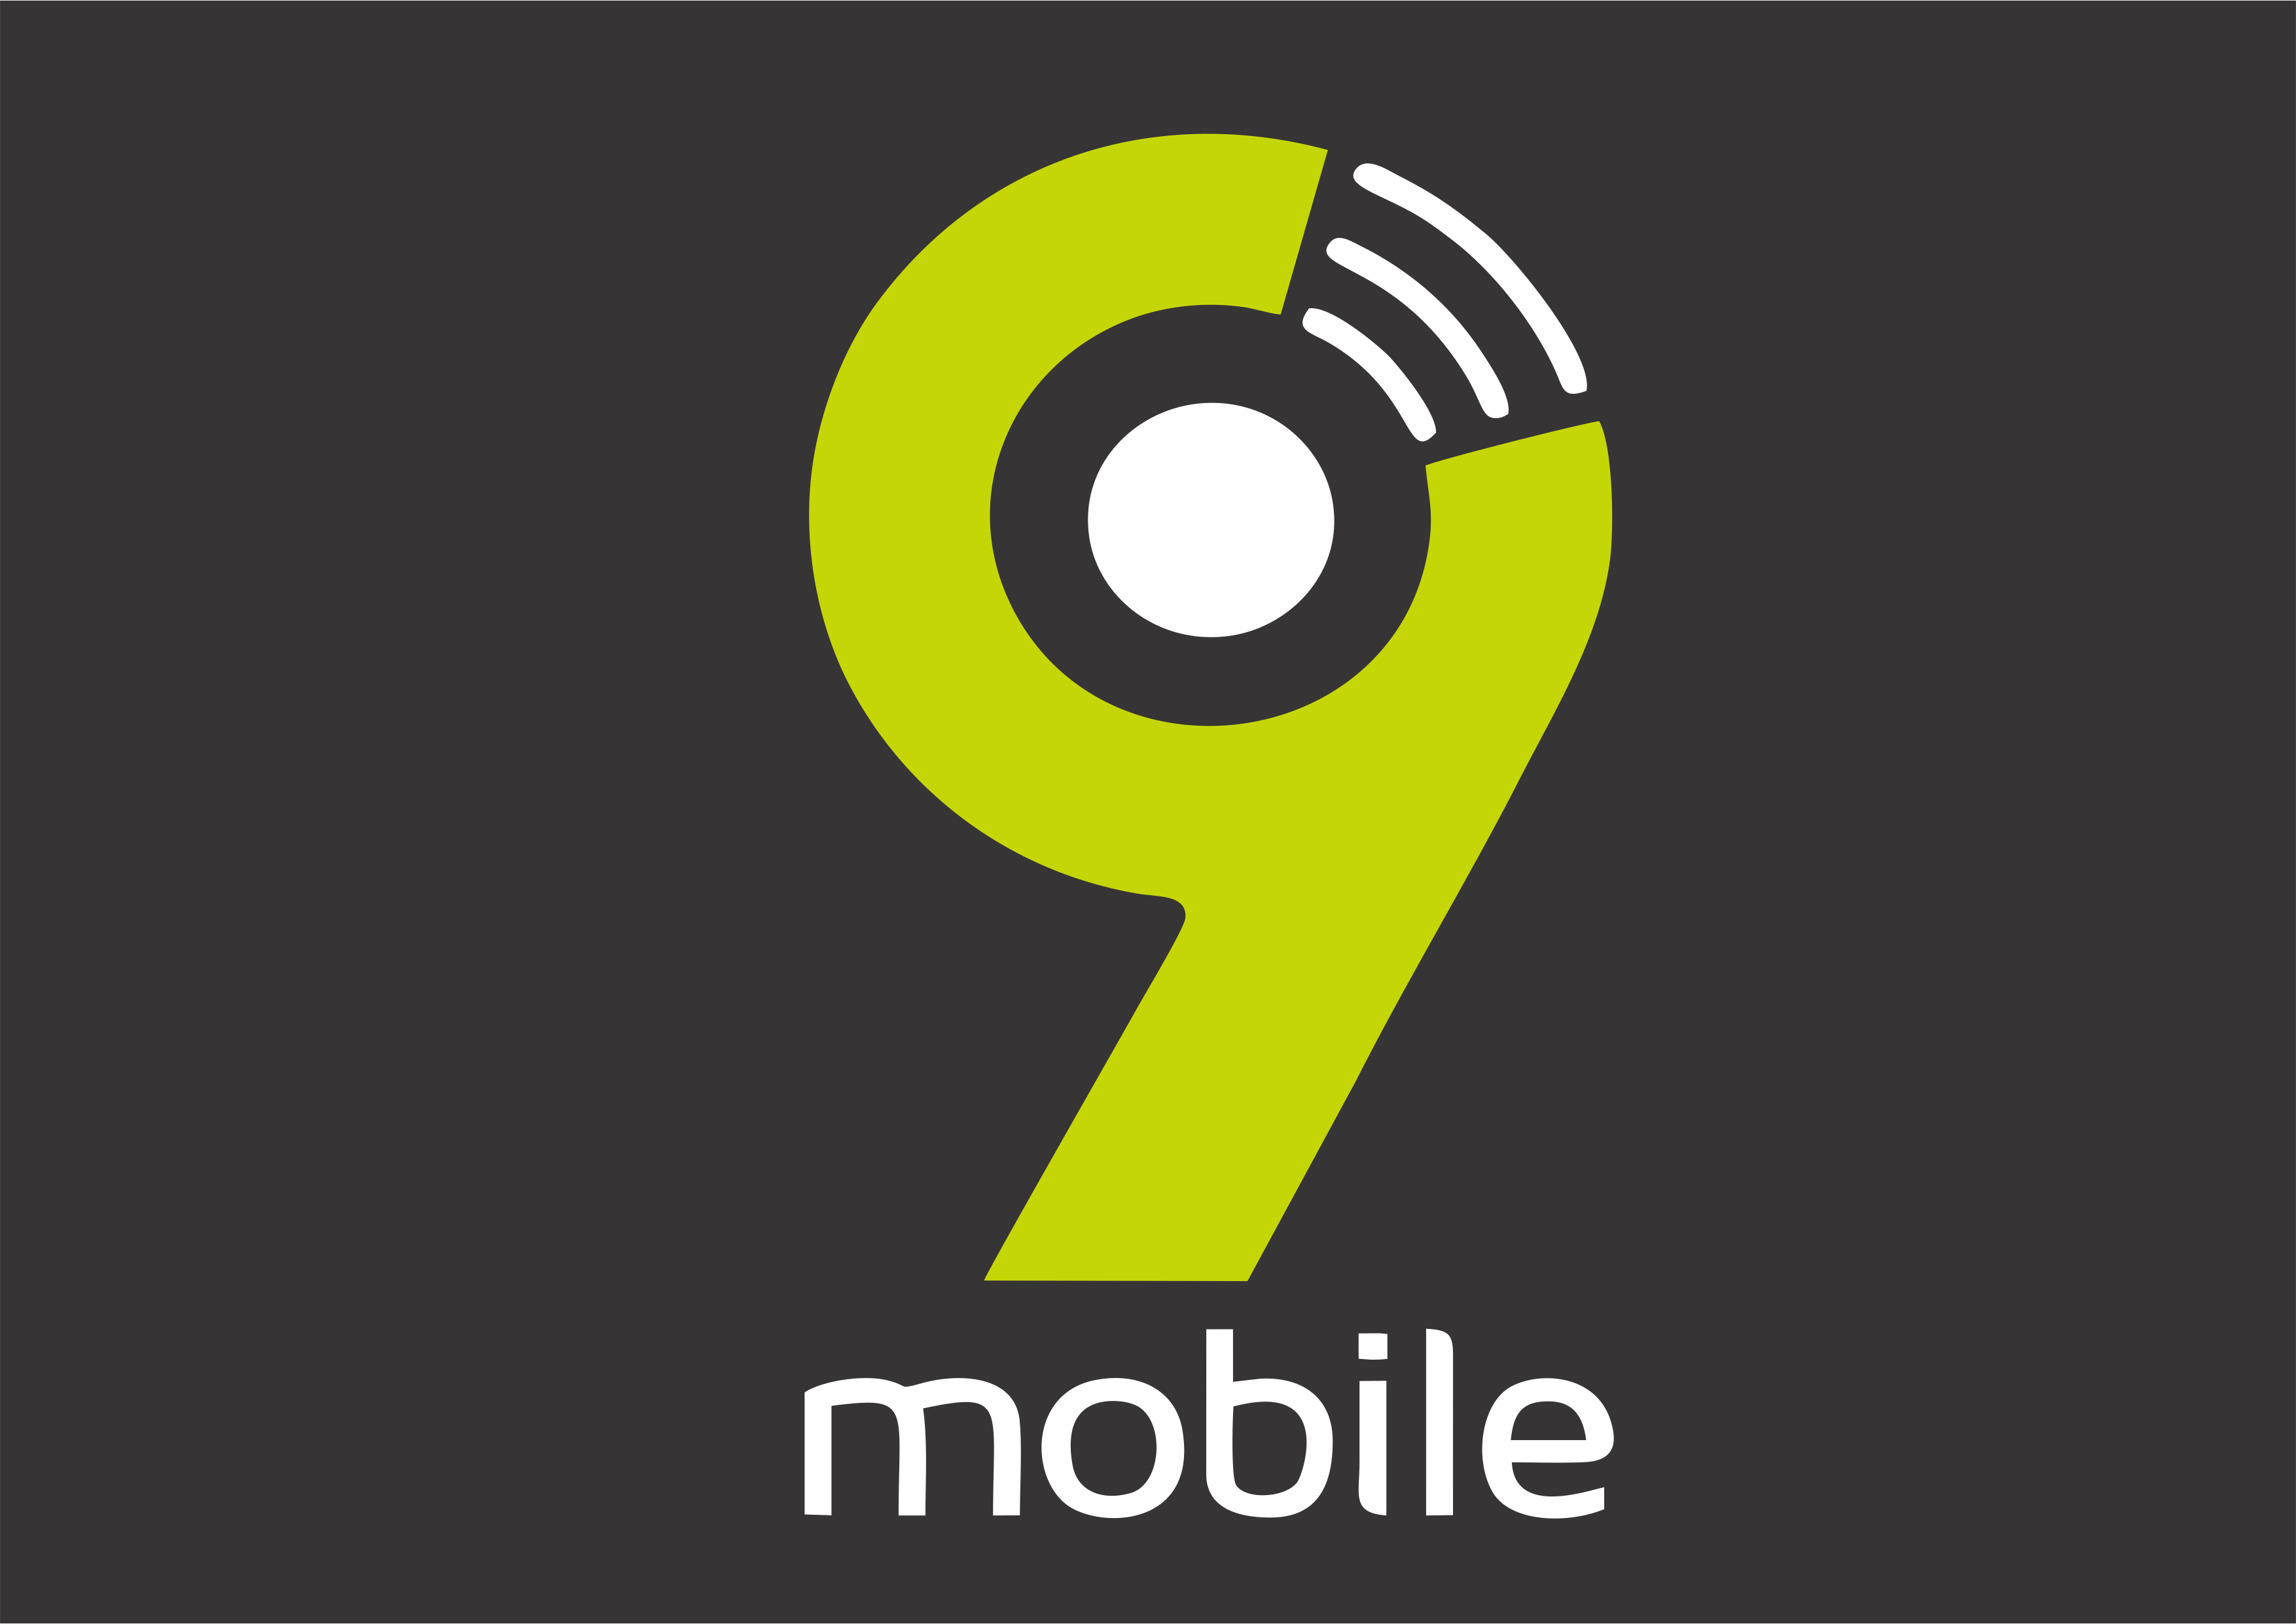 9mobile harps on priority consideration for mental health